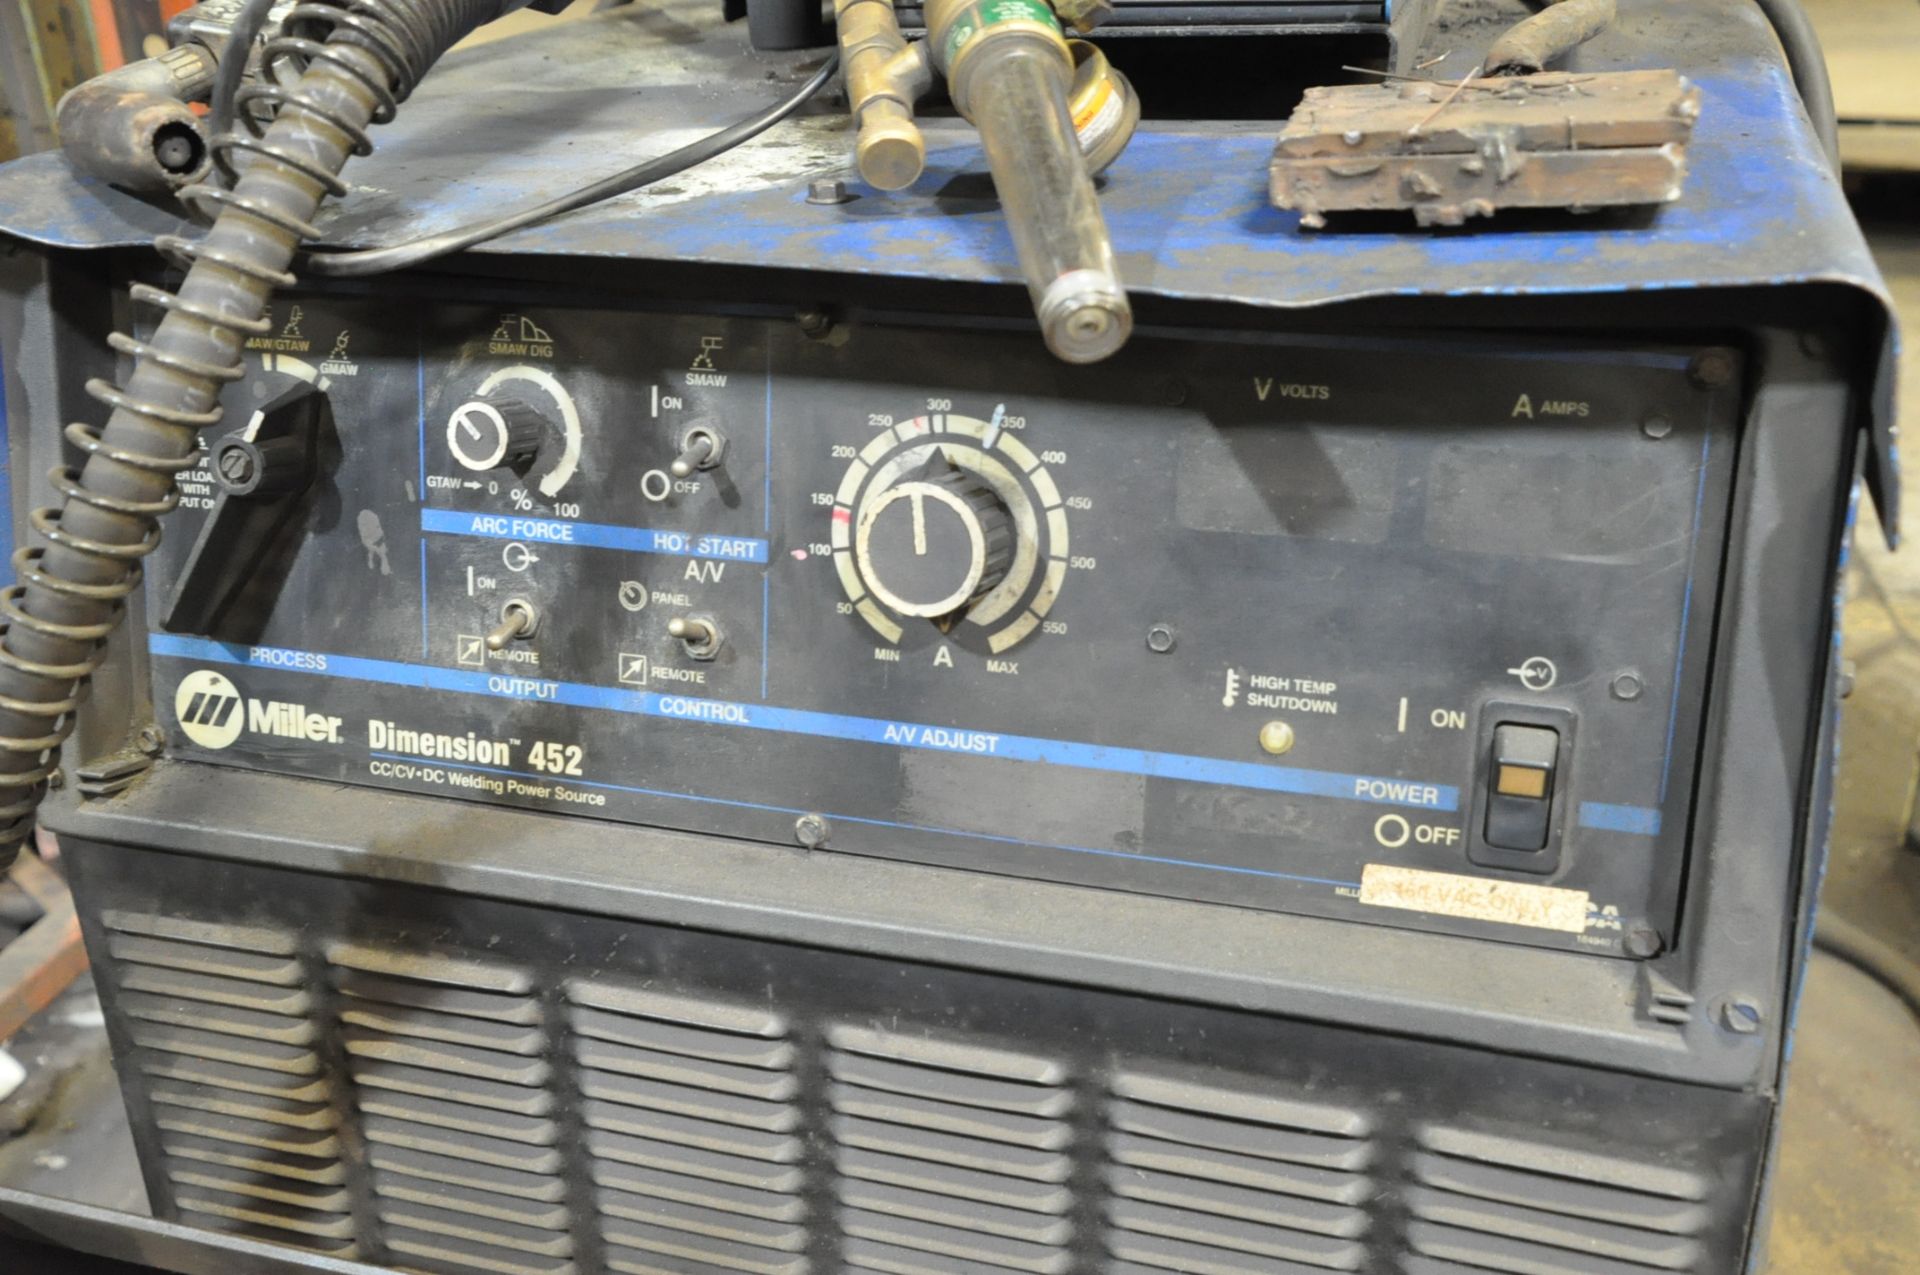 MILLER DIMENSION 452 450-AMP CC/CV-DC Welding Power Source with MILLER 70 SERIES 24V Wire Feeder - Image 2 of 4